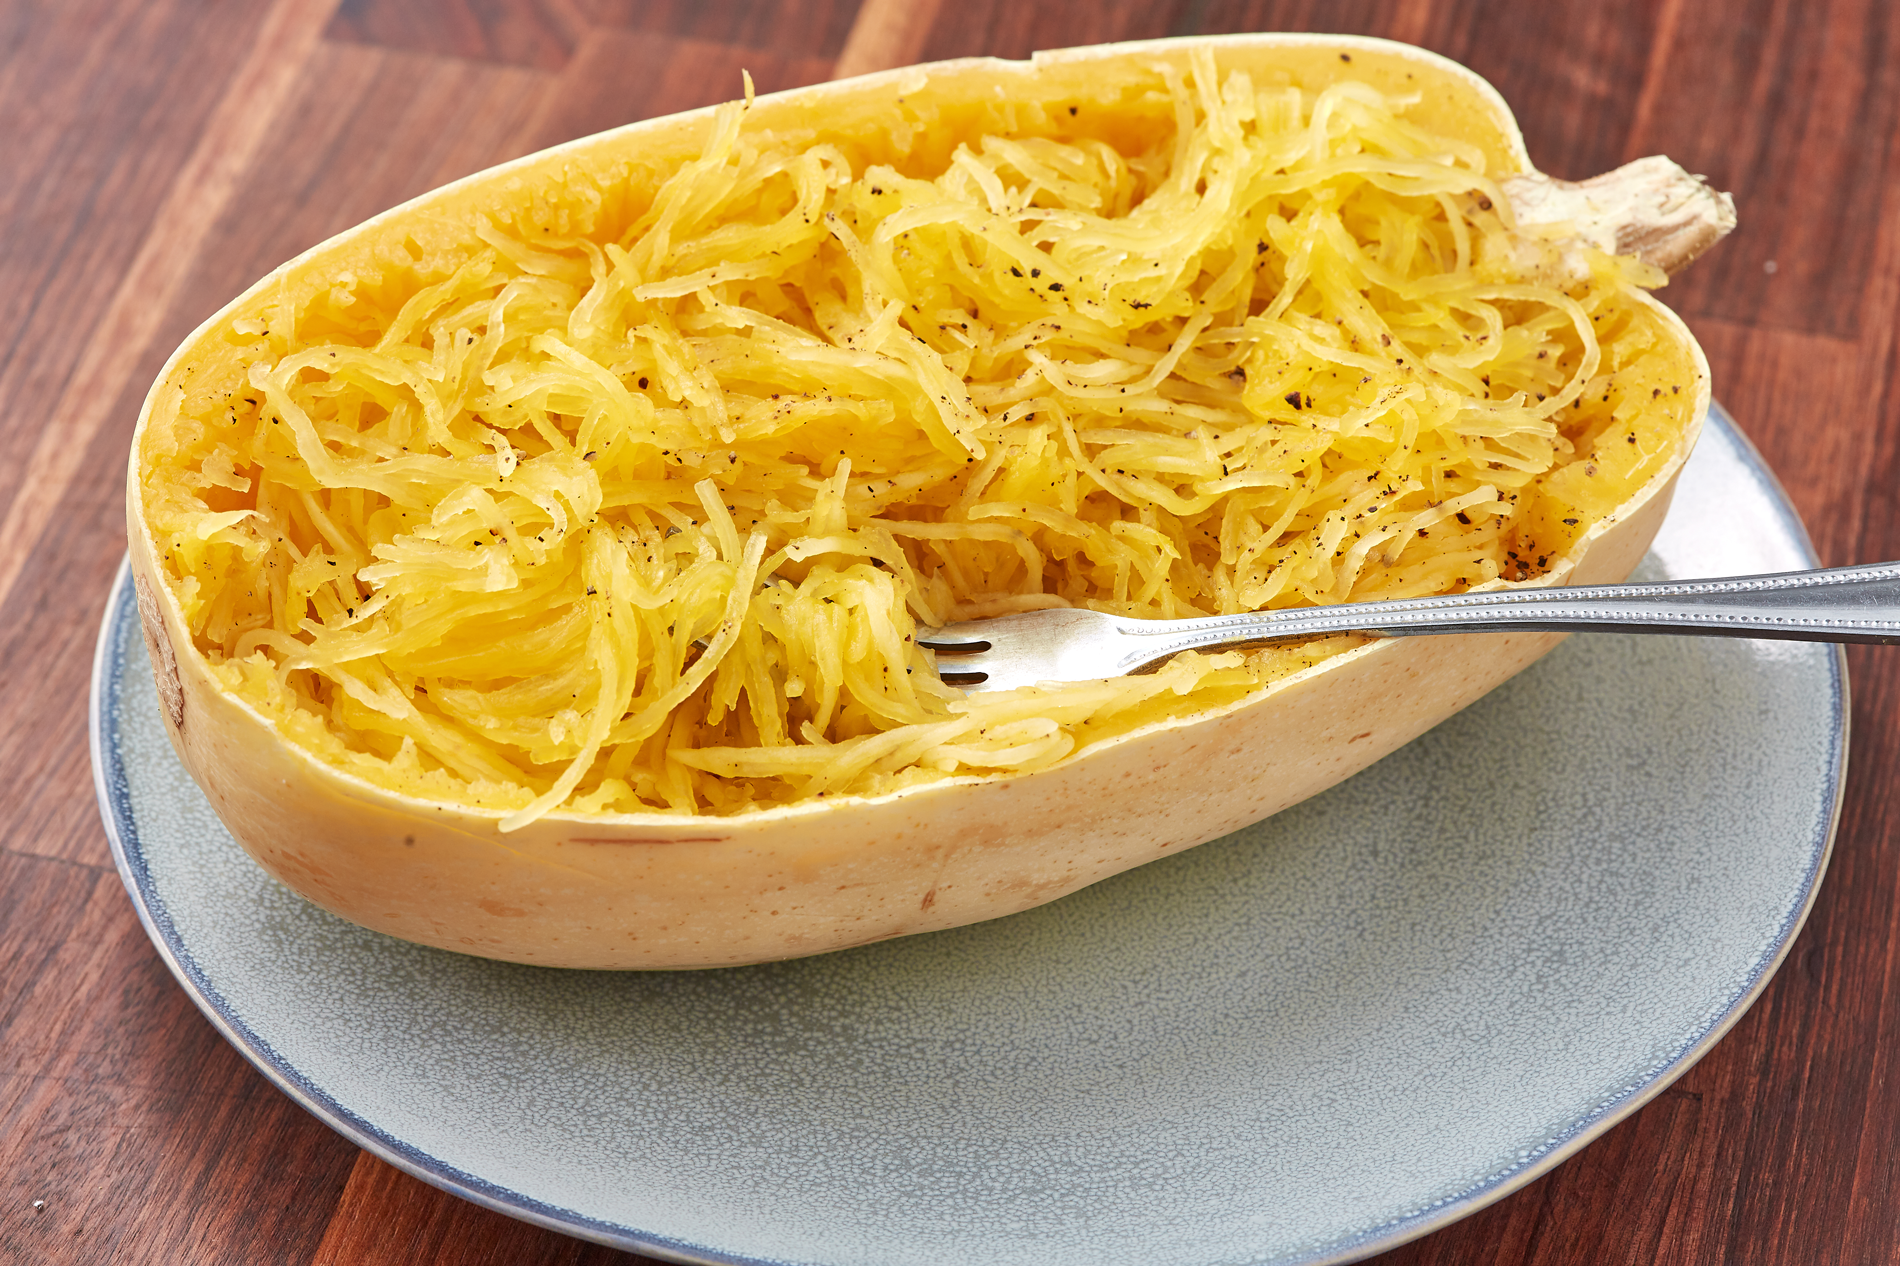 How To Microwave Spaghetti Squash - Best Way To Microwave